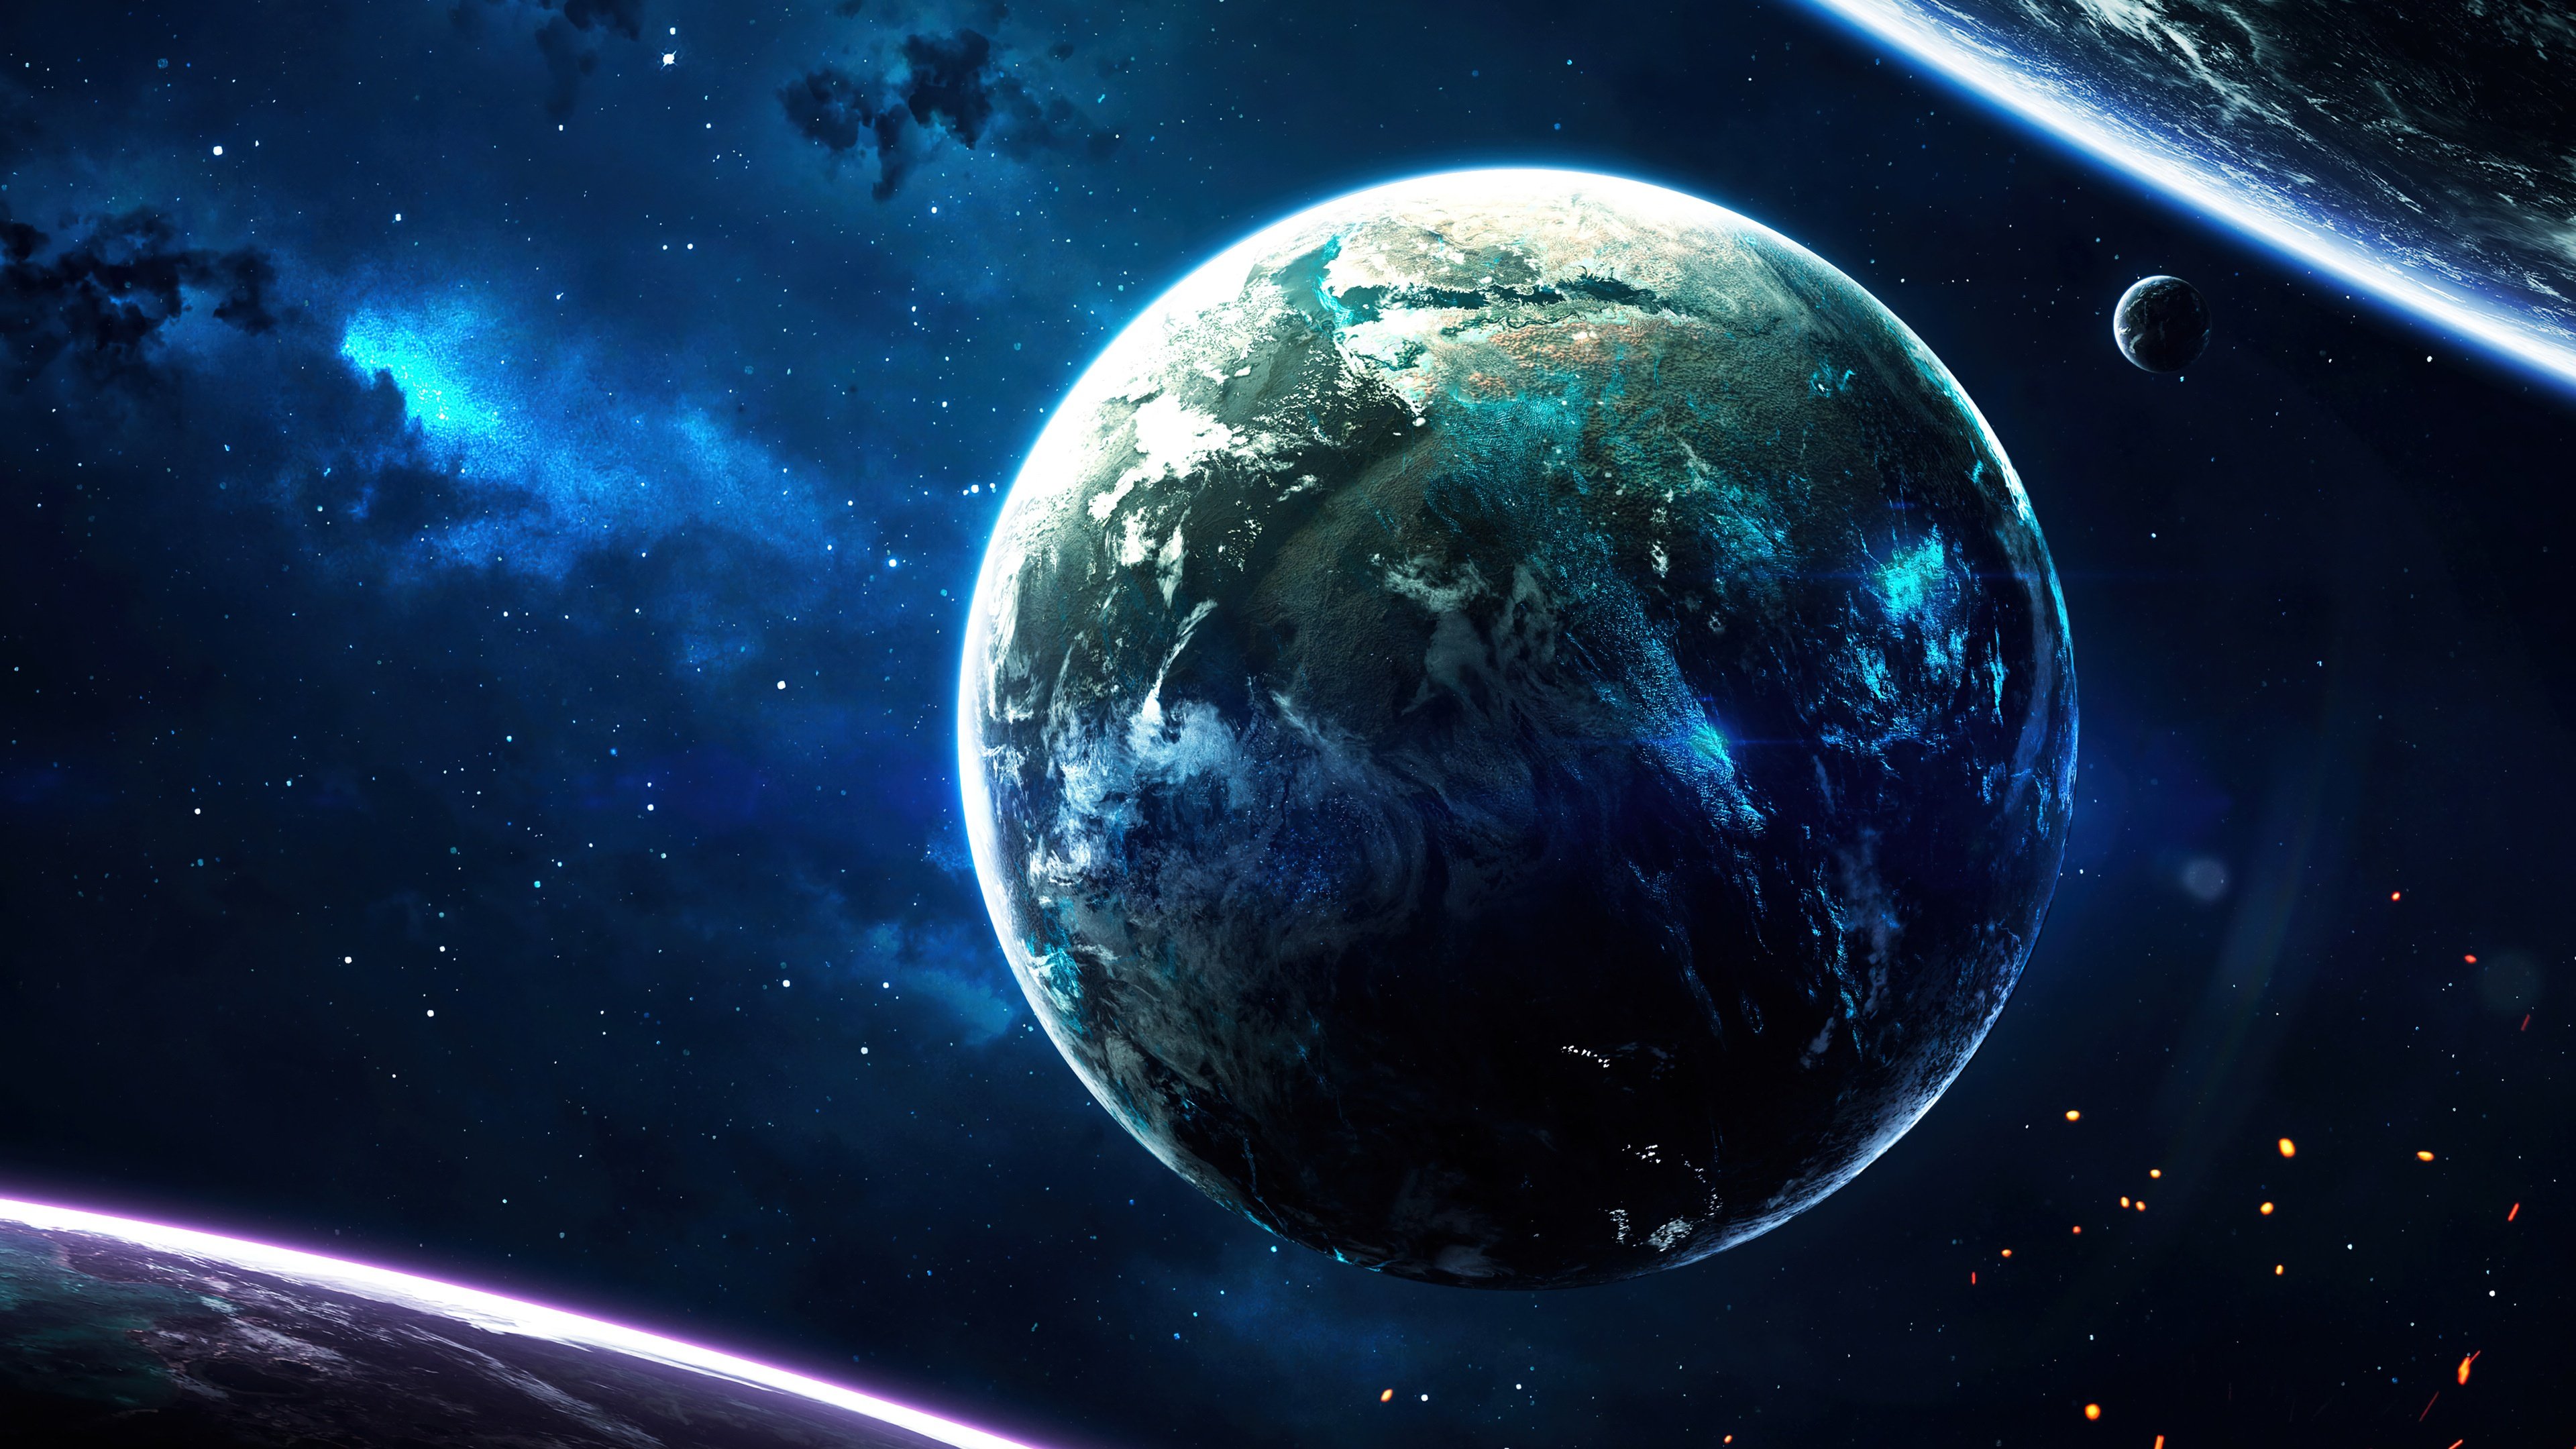 Wallpaper Planets in space